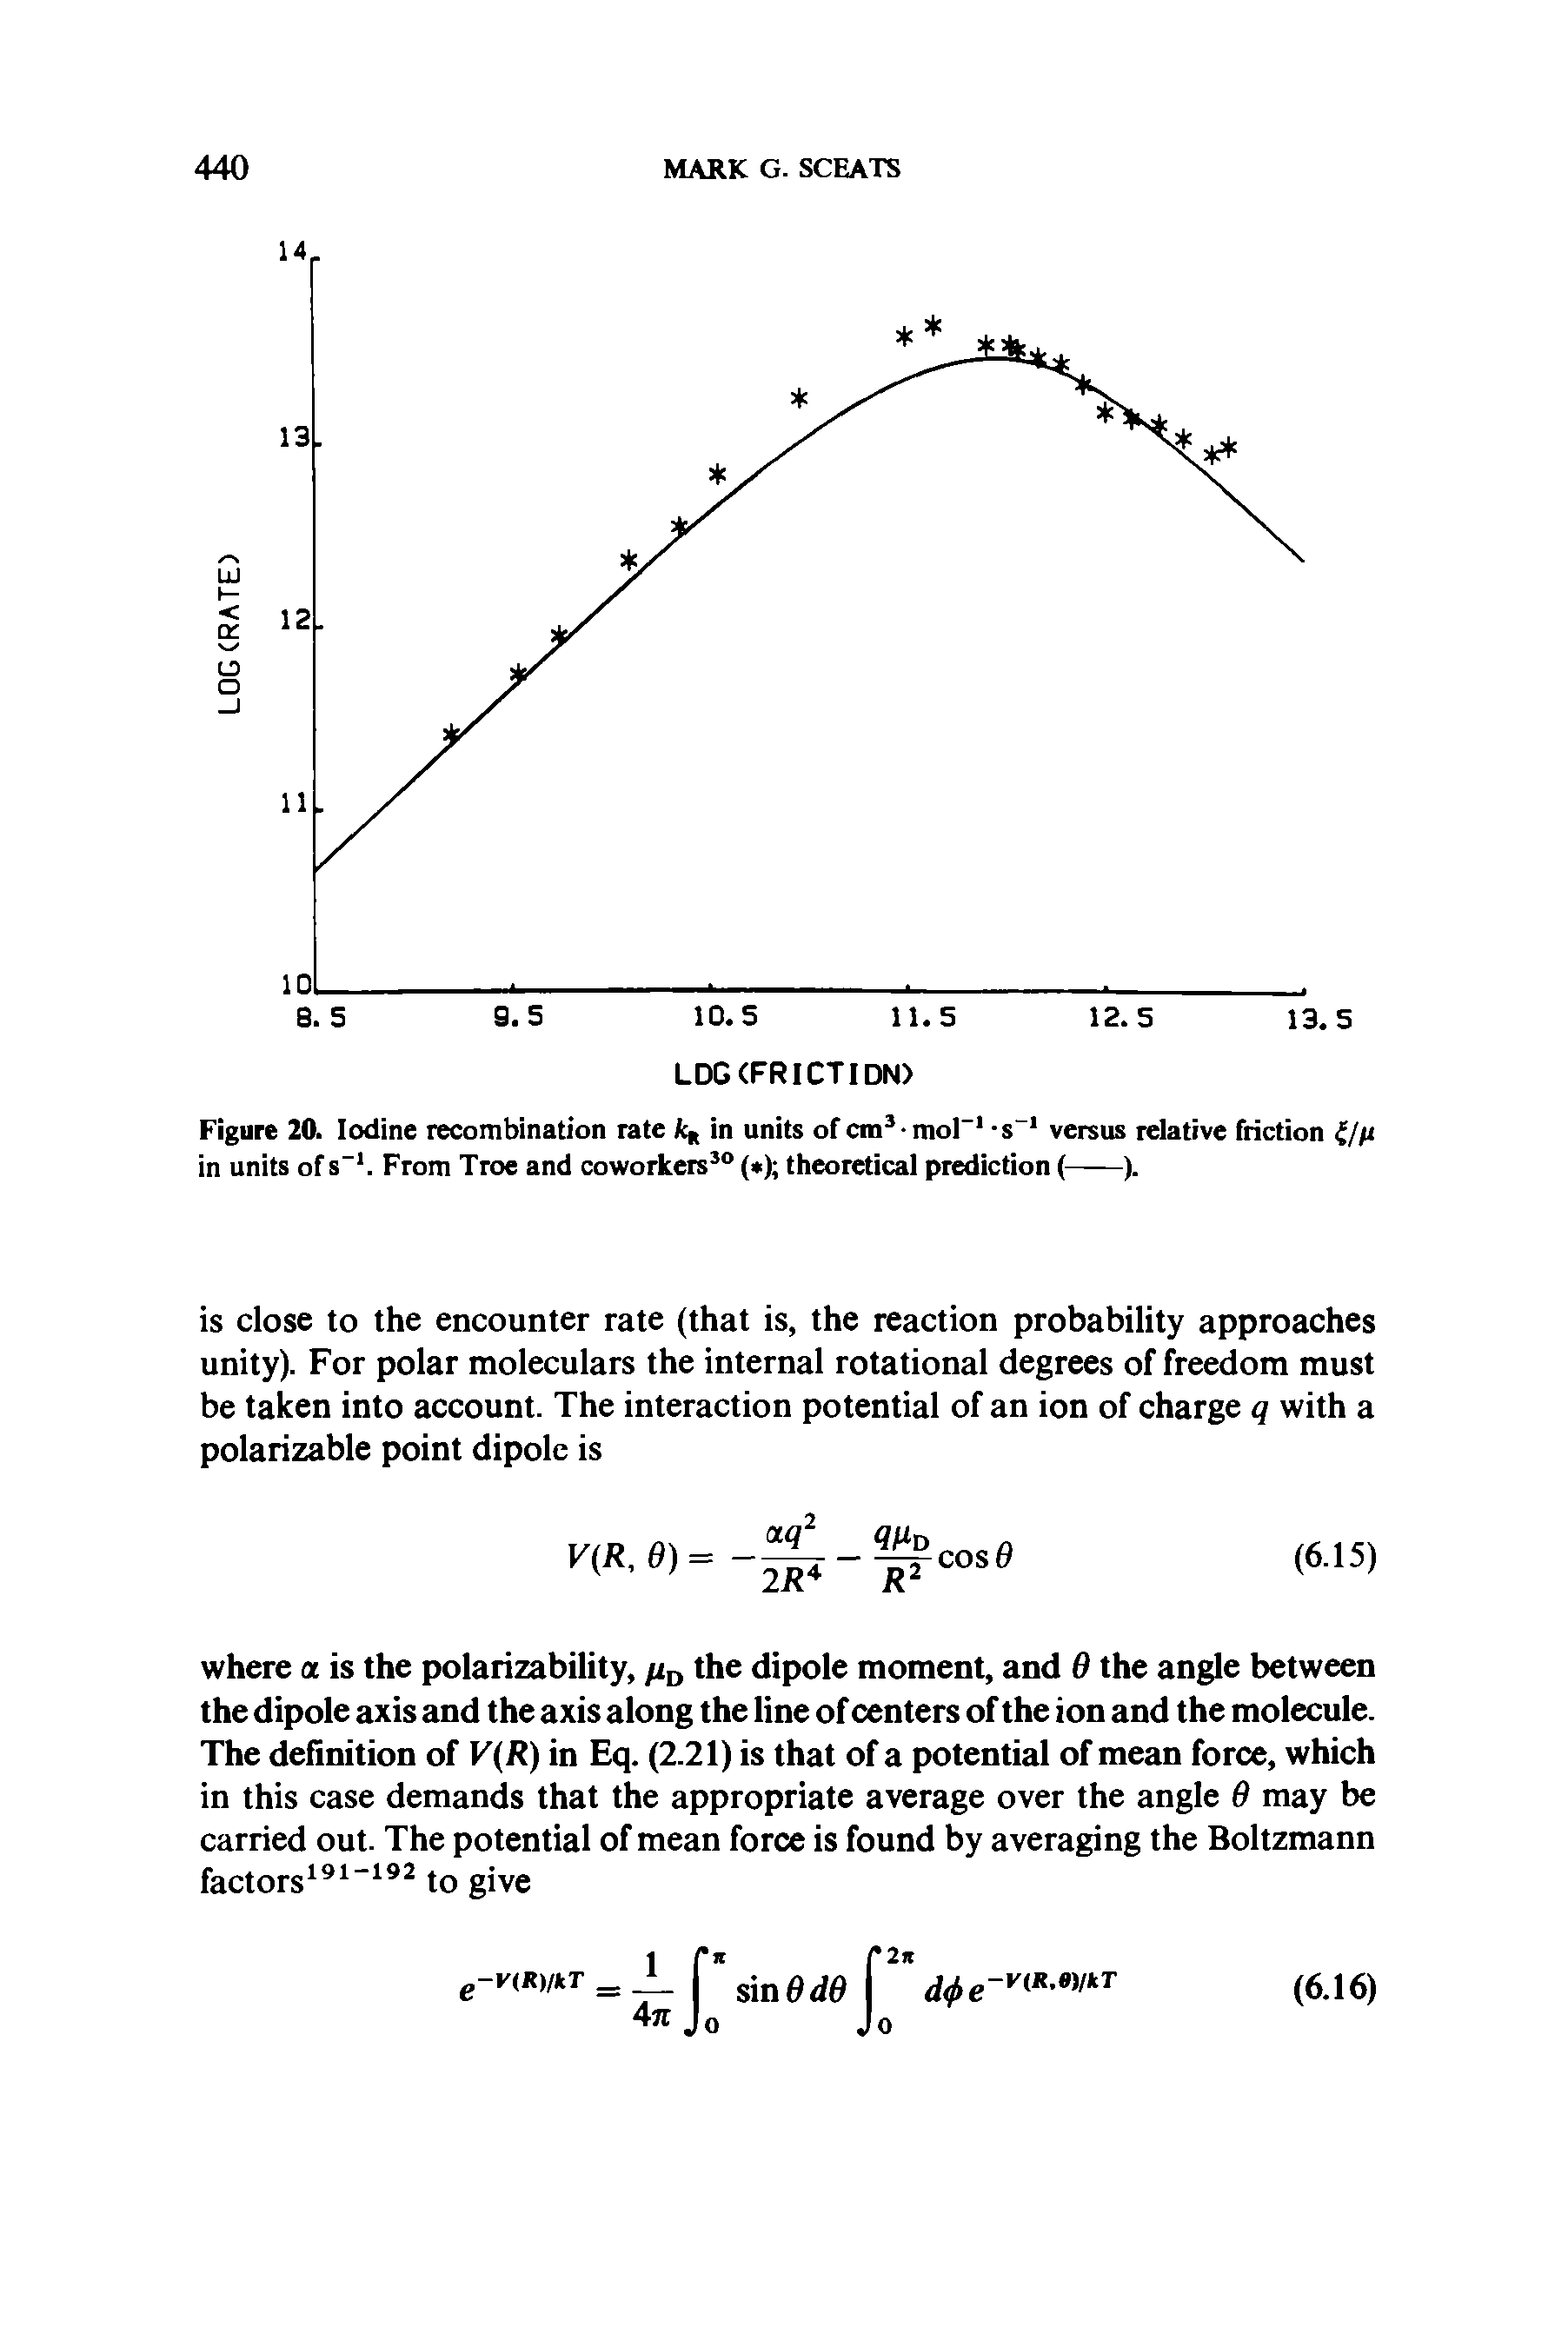 Figure 20. Iodine recombination rate in units of cm mol s versus relative friction i/n in units of s" . From Troe and coworkers ( ) theoretical prediction (-).